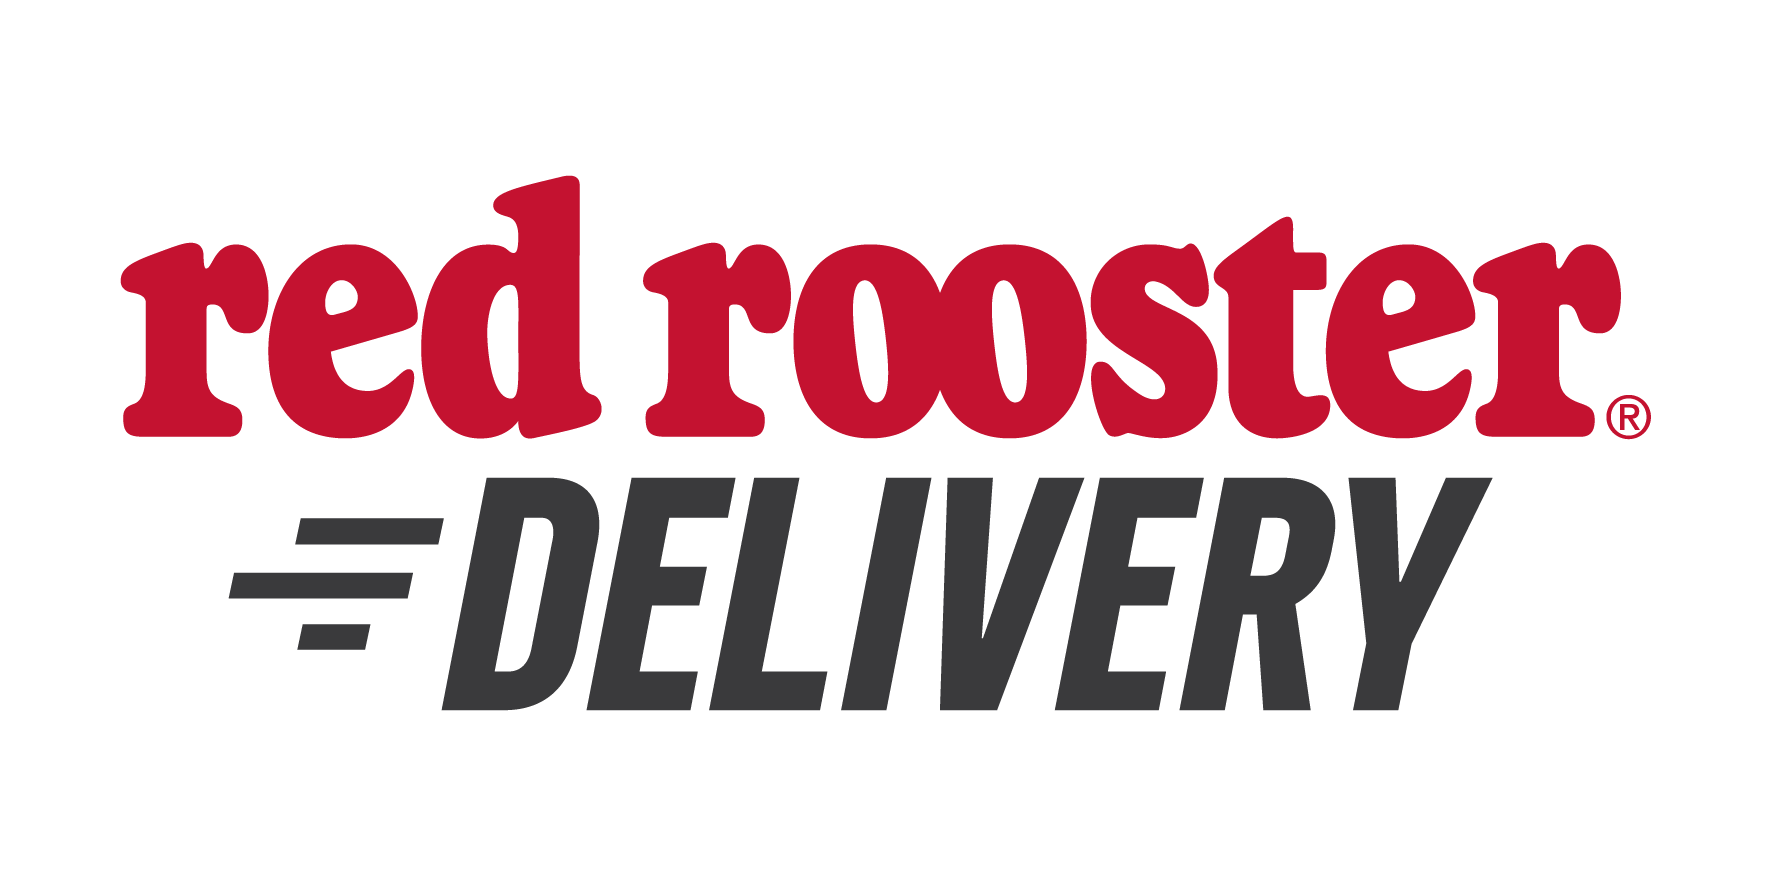 Red Rooster Logo - Red rooster logo png 4 » PNG Image